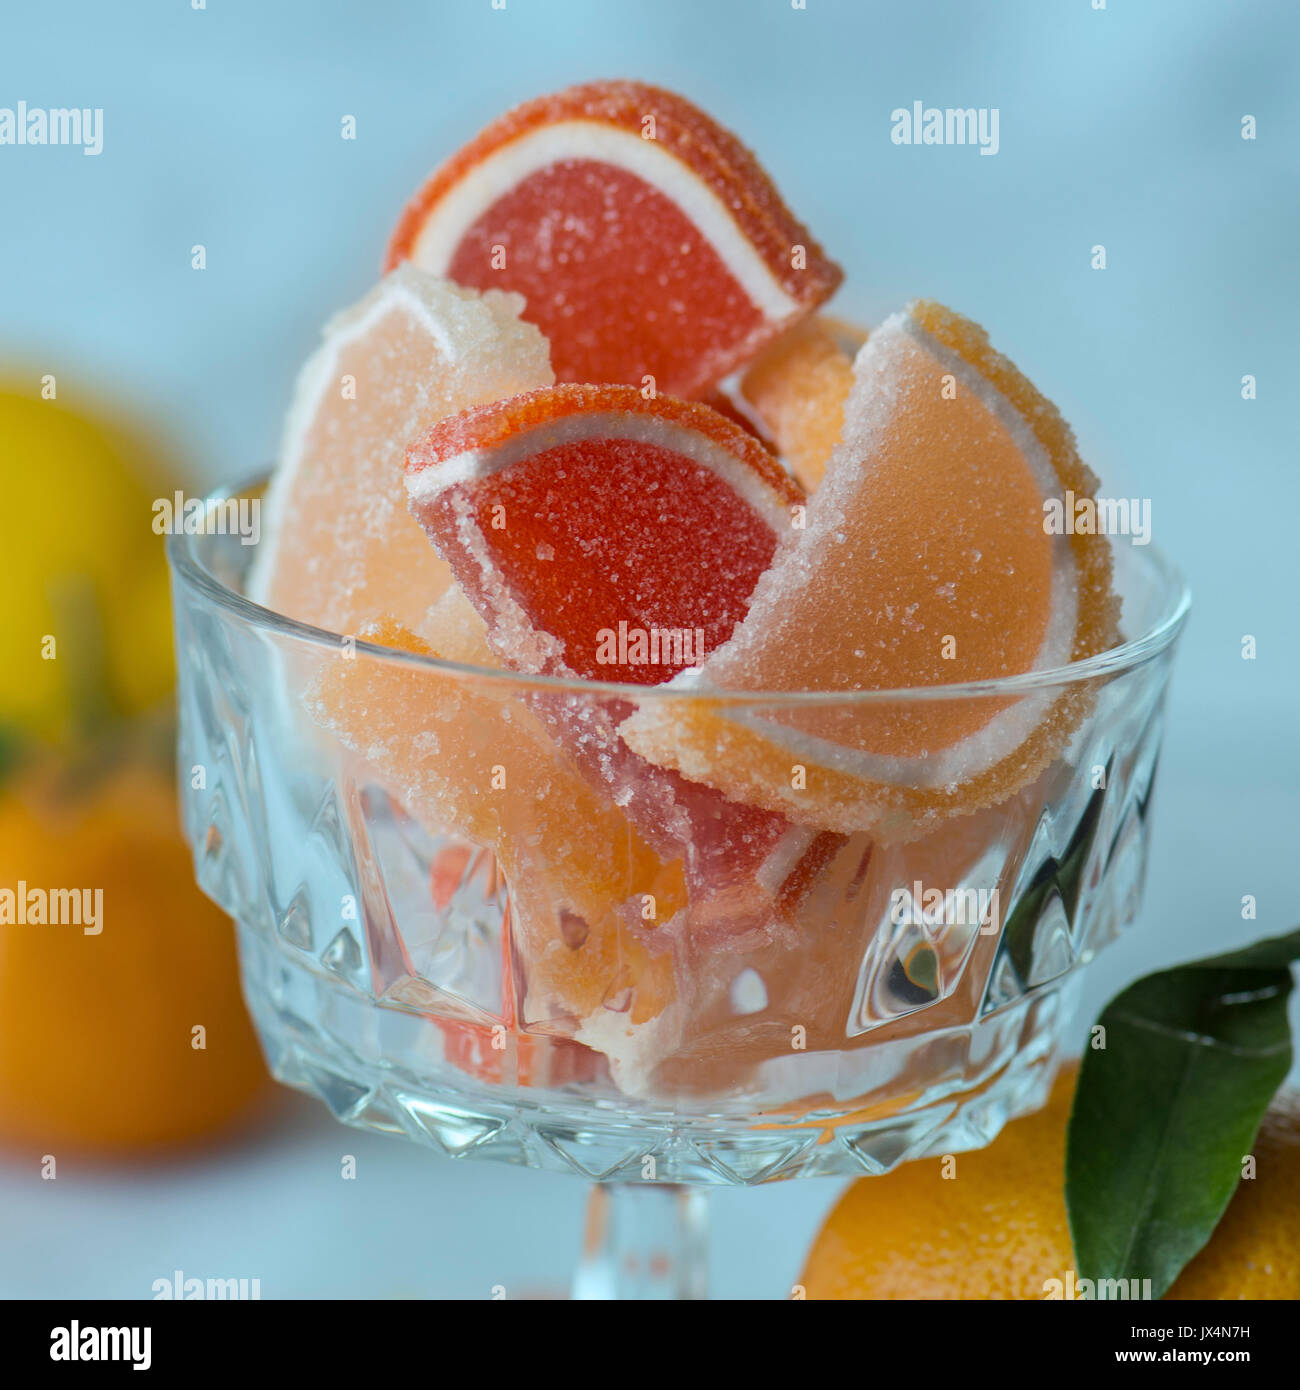 Candied citrus fruit in a glass compote Stock Photo